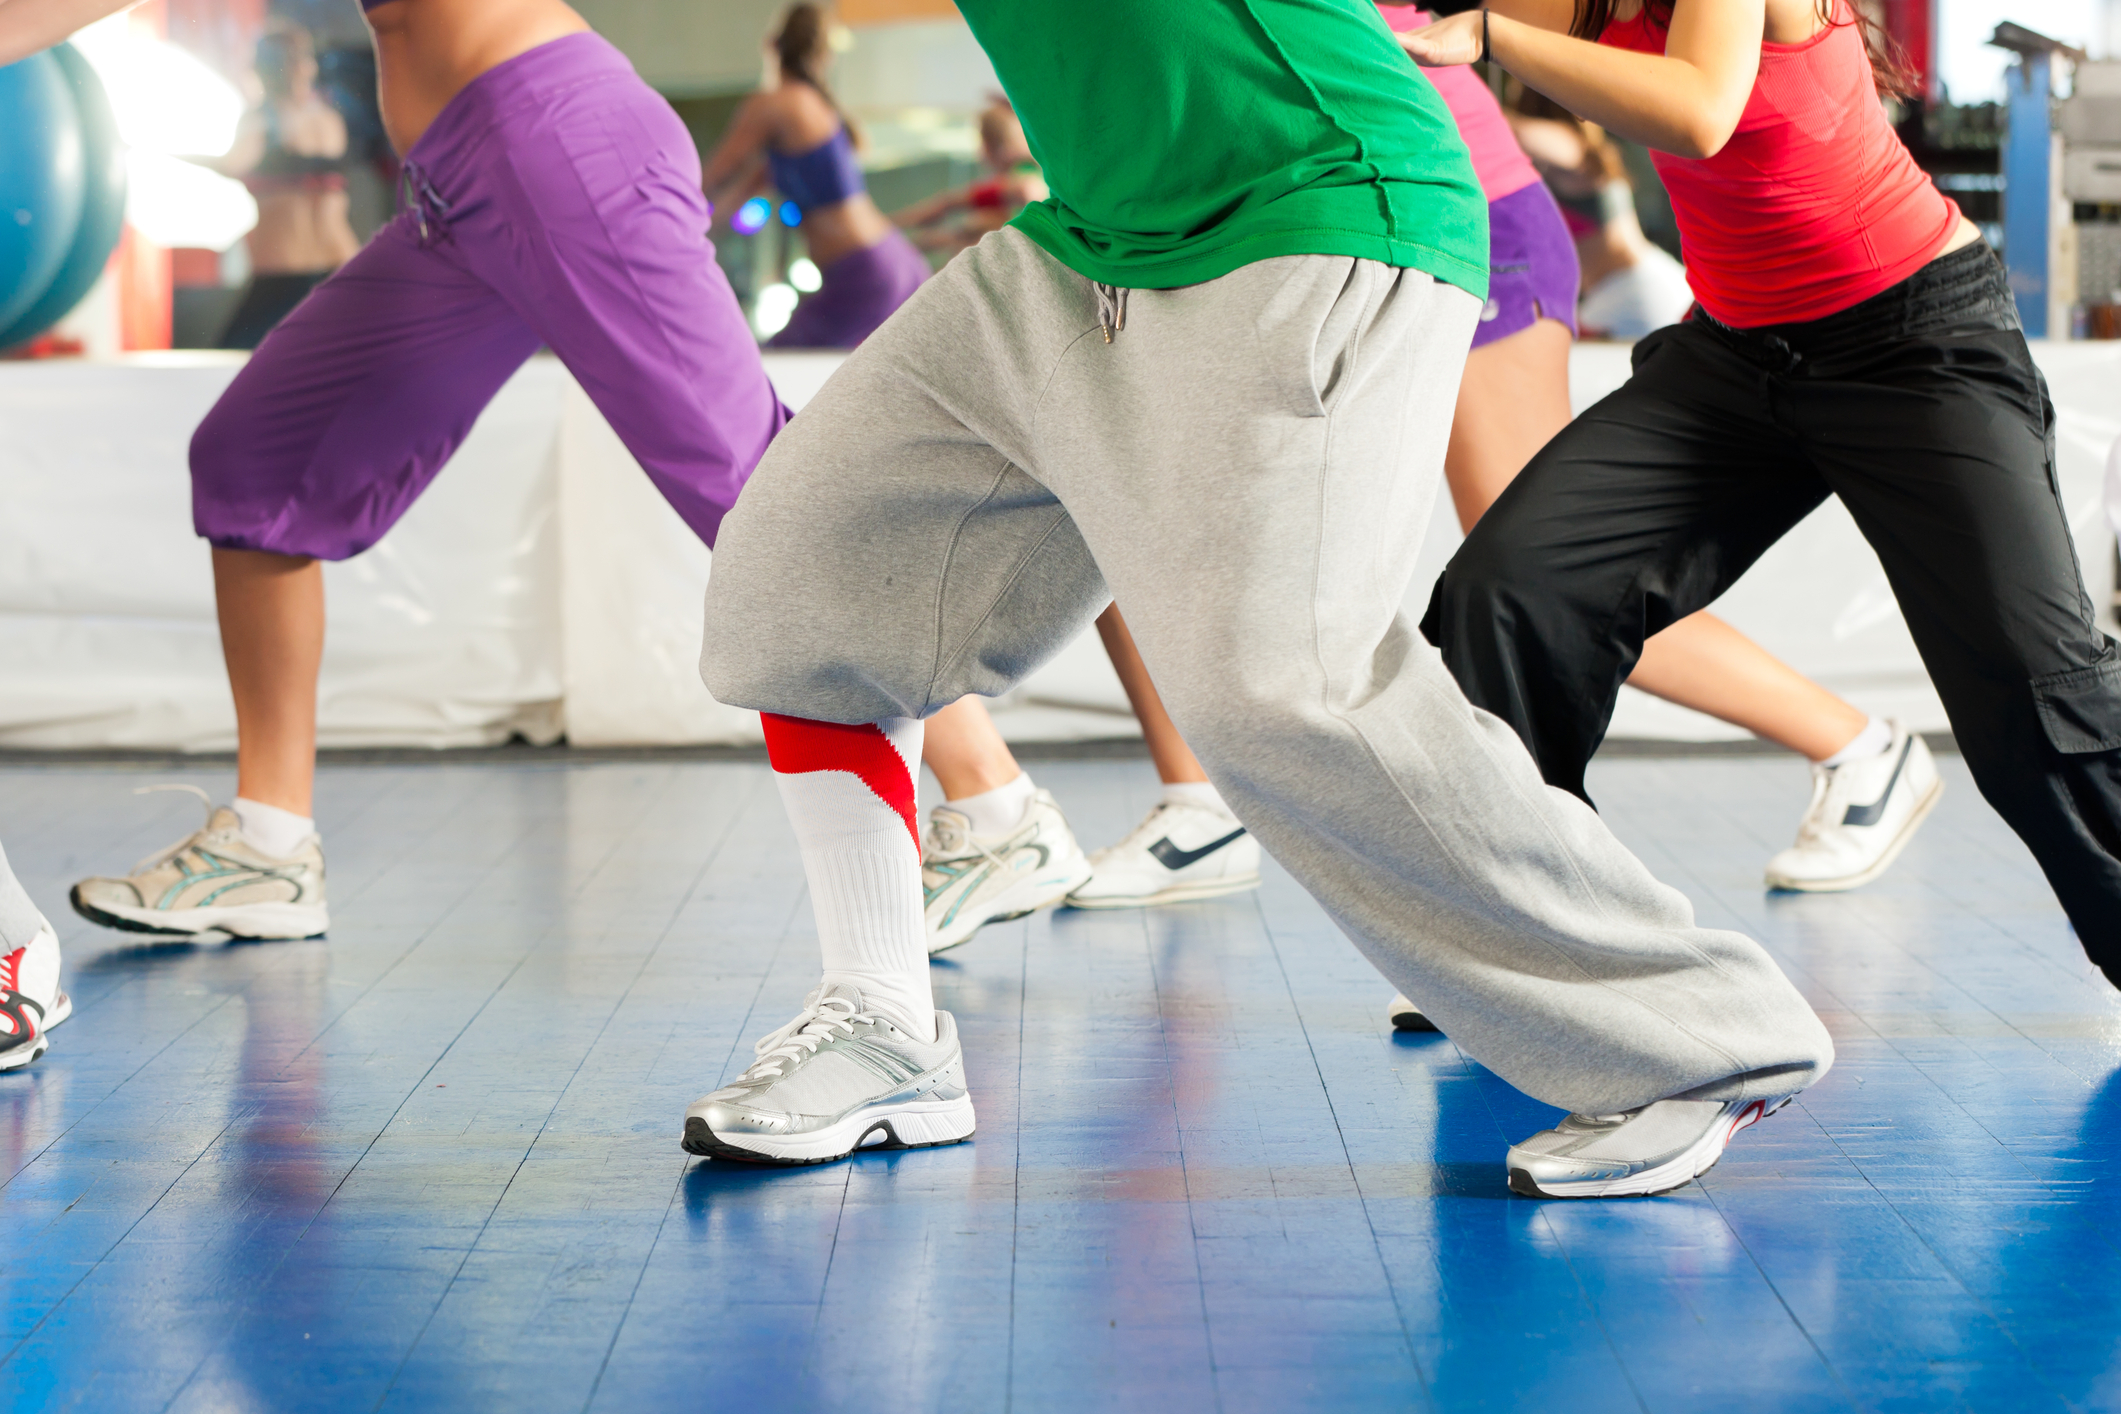 Take your physical activity to another level with Zumba.